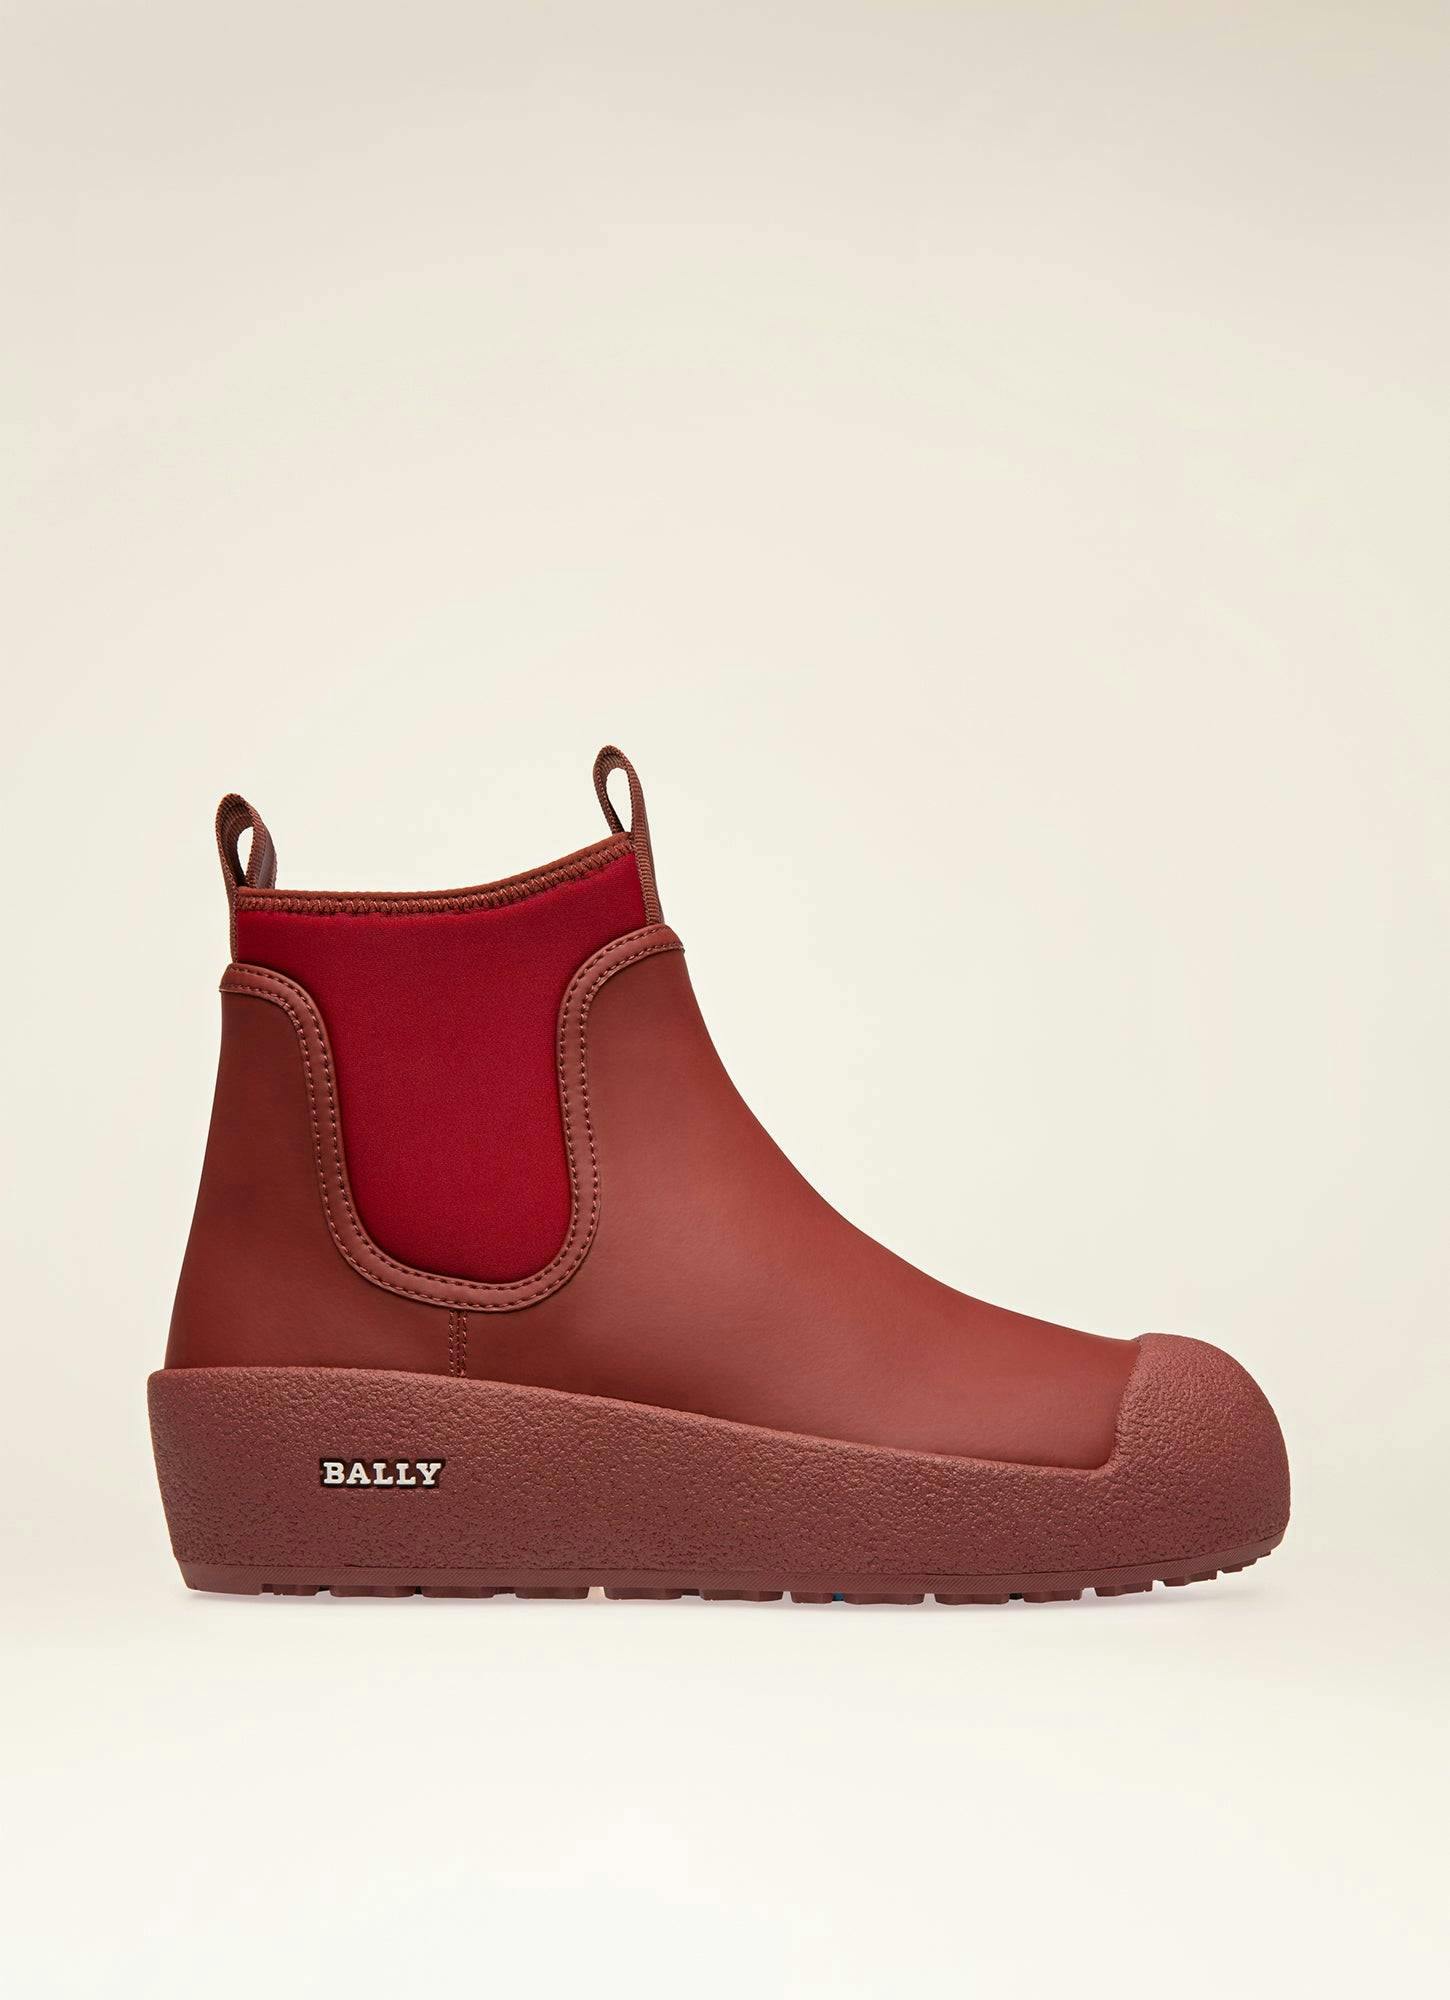 BALLY CURLING Leather Boots In Heritage Red - Women's - Bally - 01